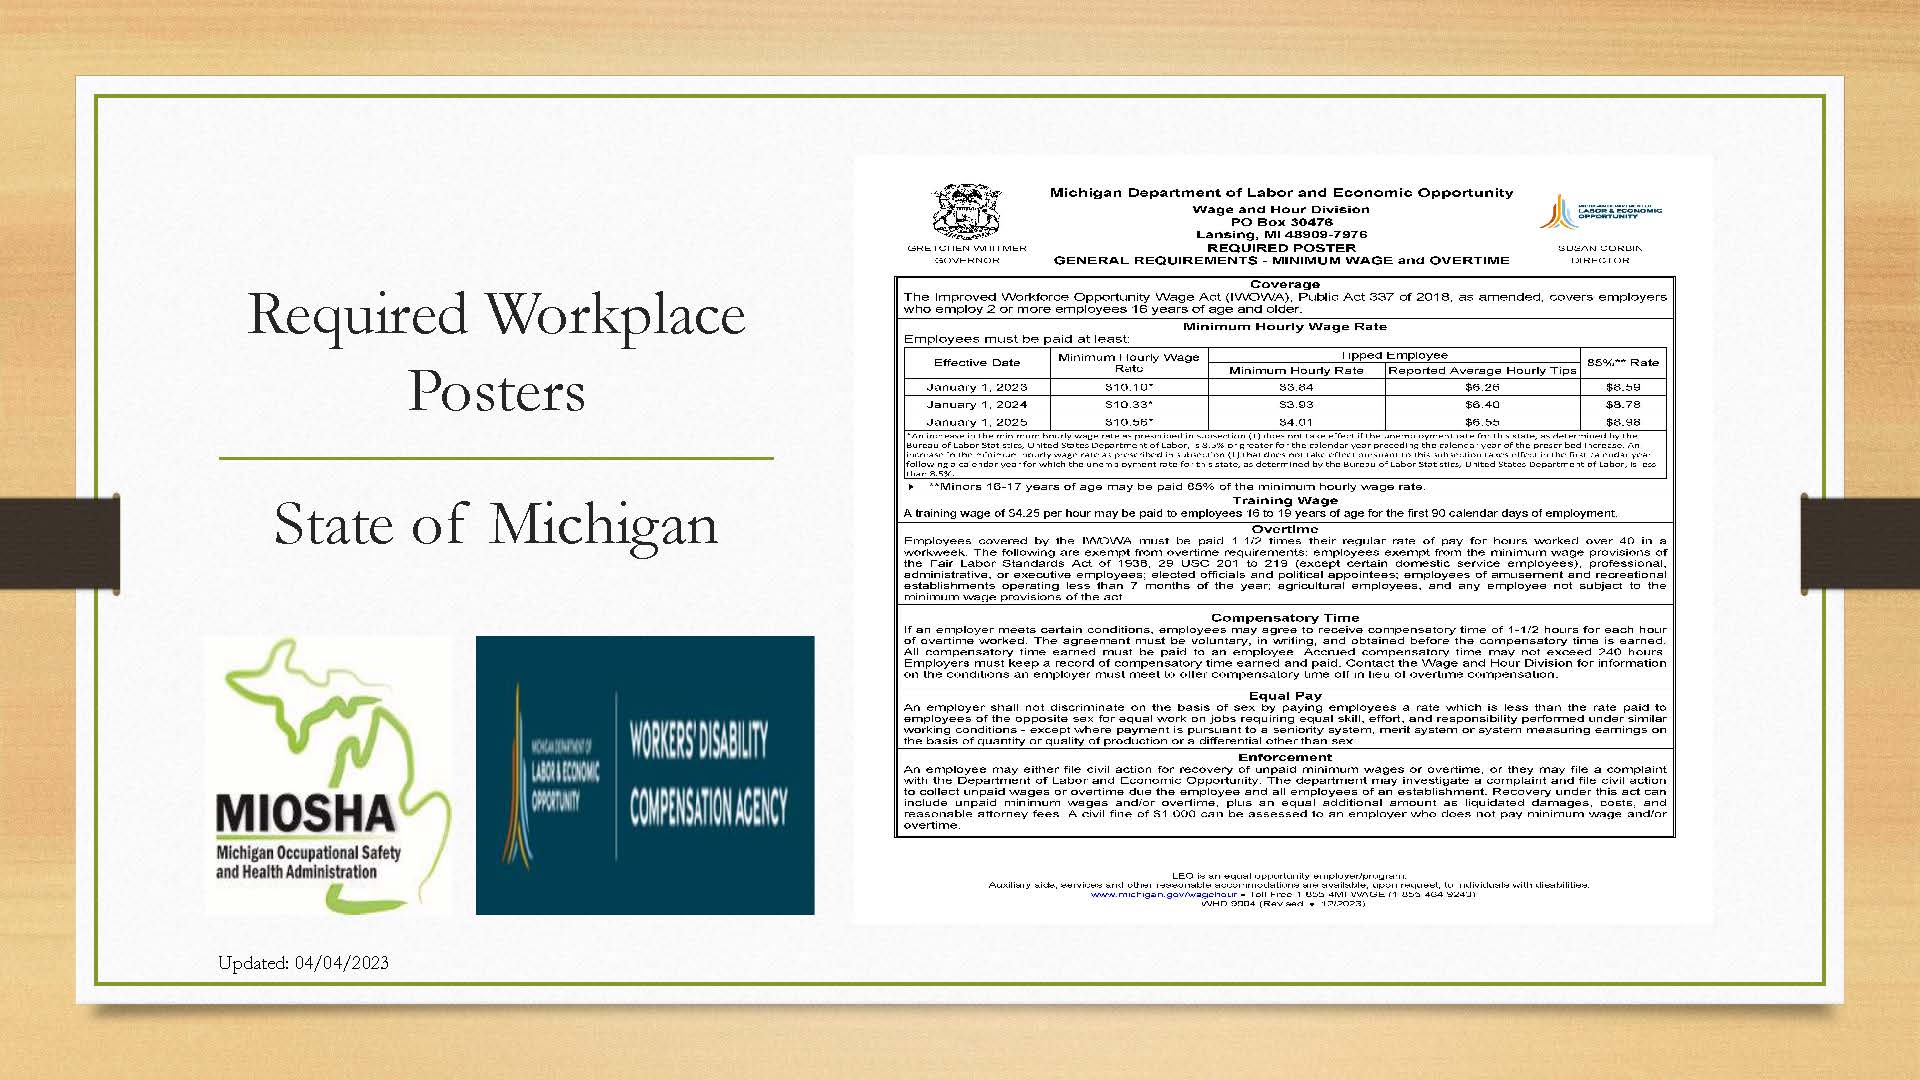 Poster showing the minimum wages for the State of Michigan for 2023-2025